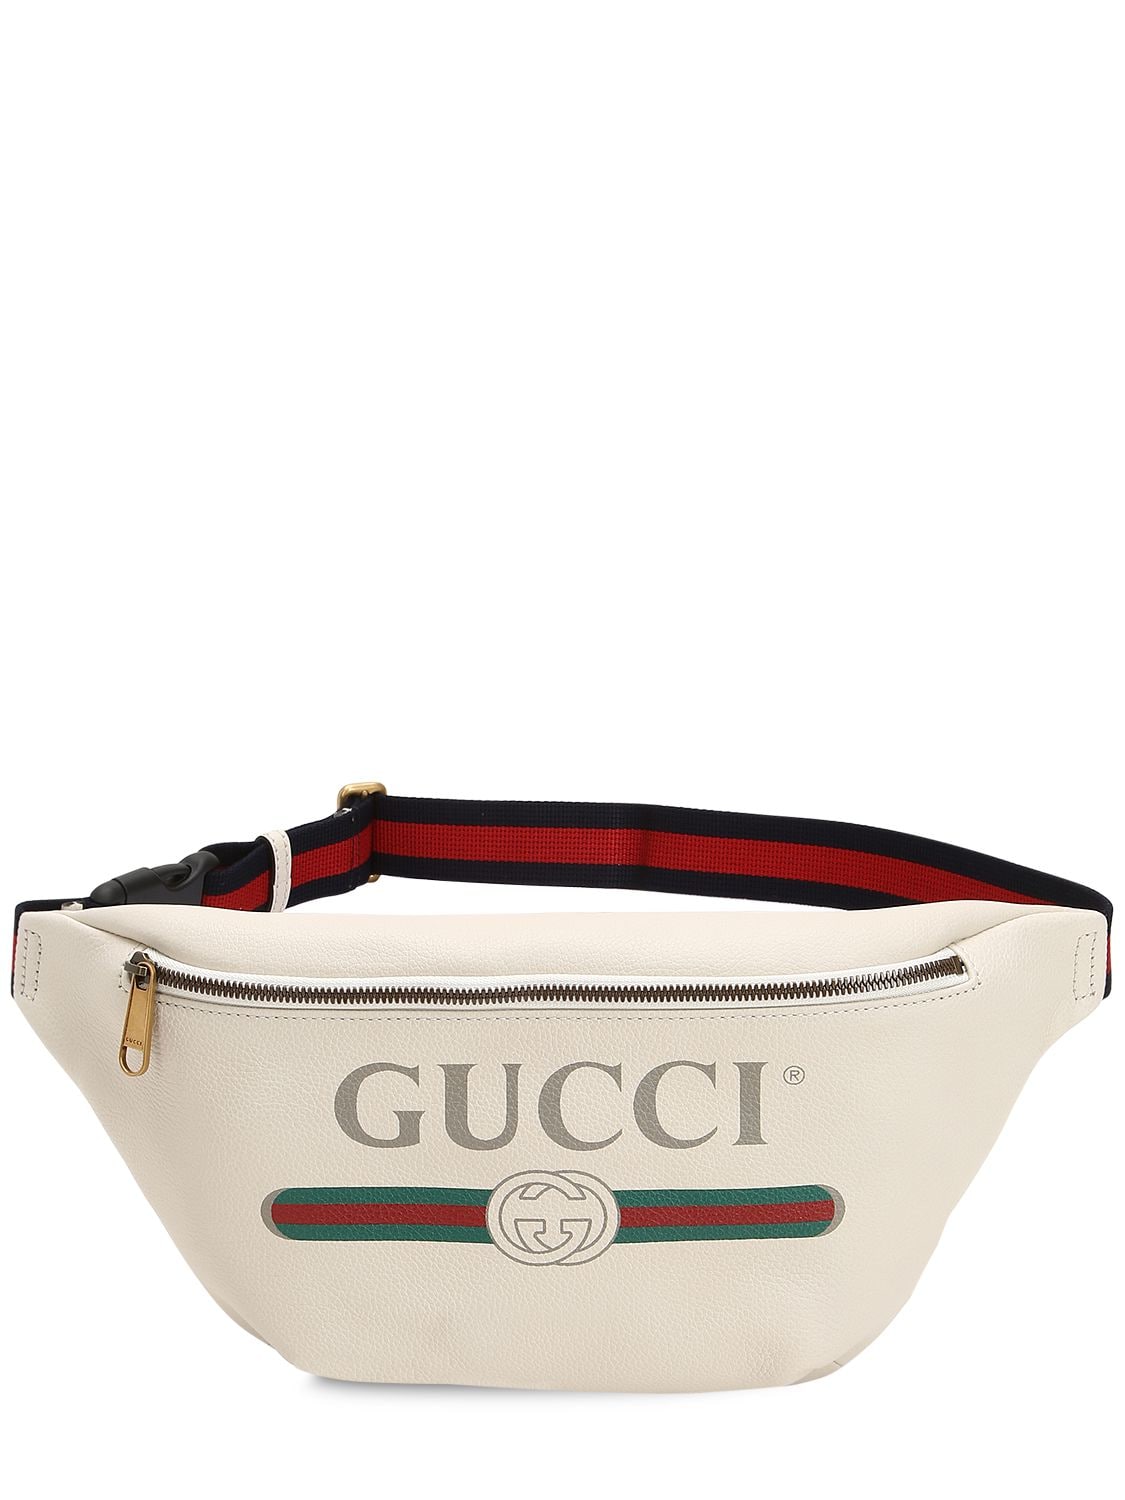 Large Gucci Print Leather Belt Bag | The Fashionisto